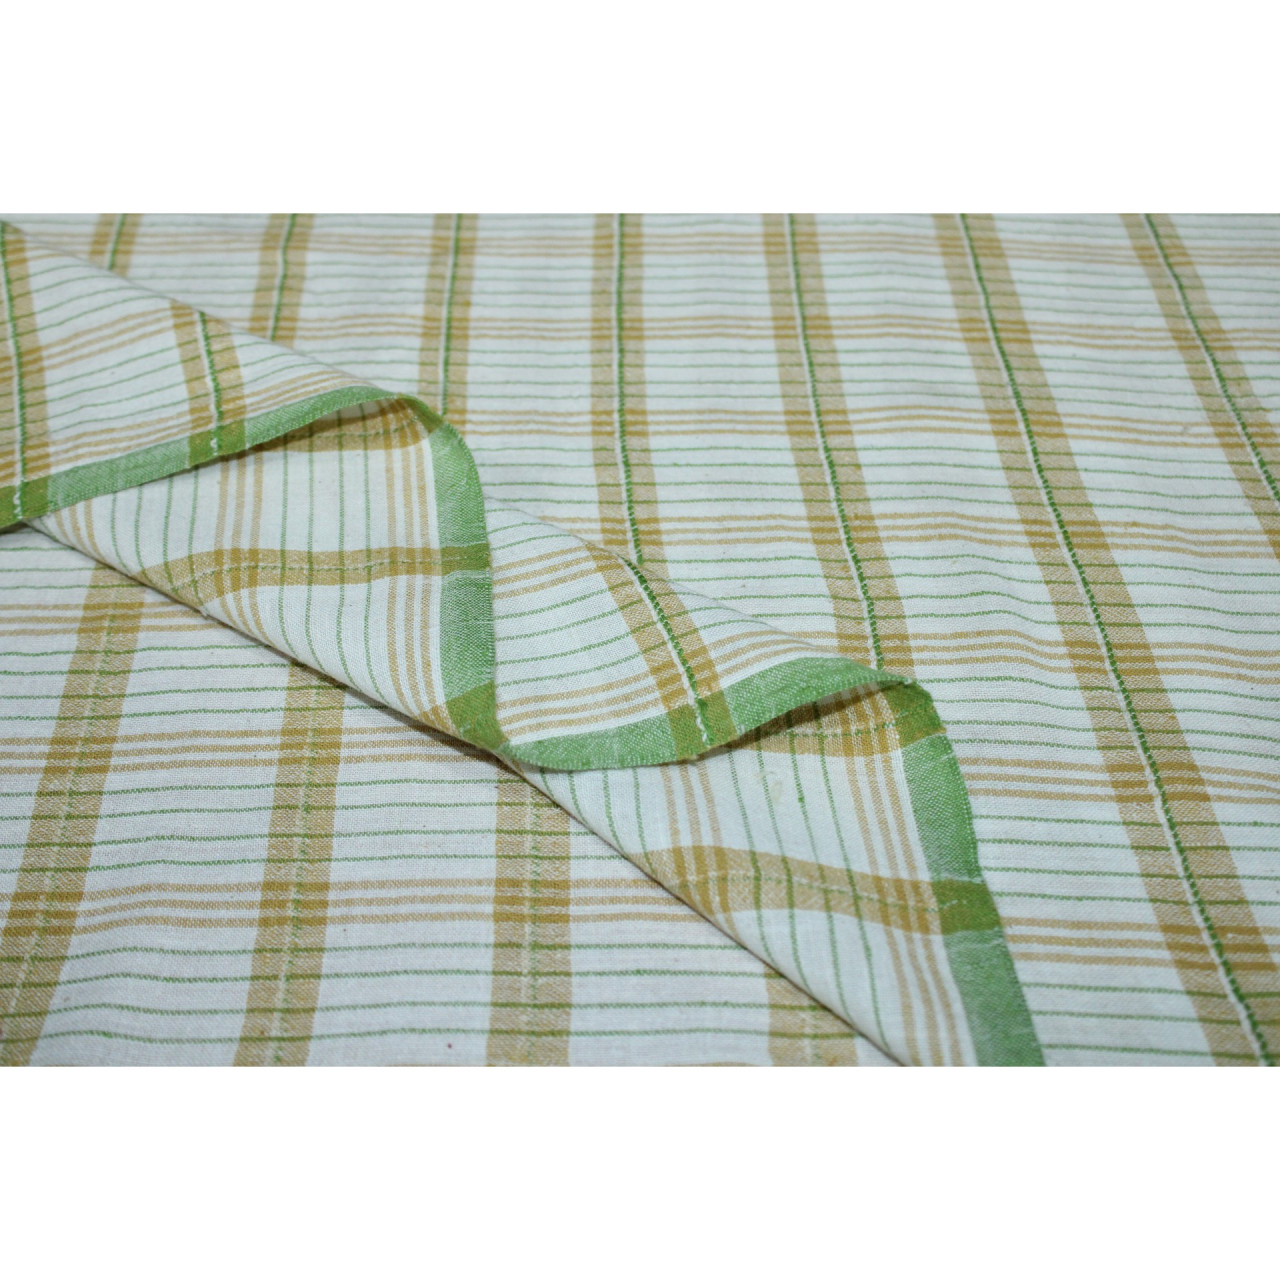 (2126) Kala cotton Azo-free dyed Kutchy yardage from Kutch with extra-weft - Yellow, green, white, stripes, textured